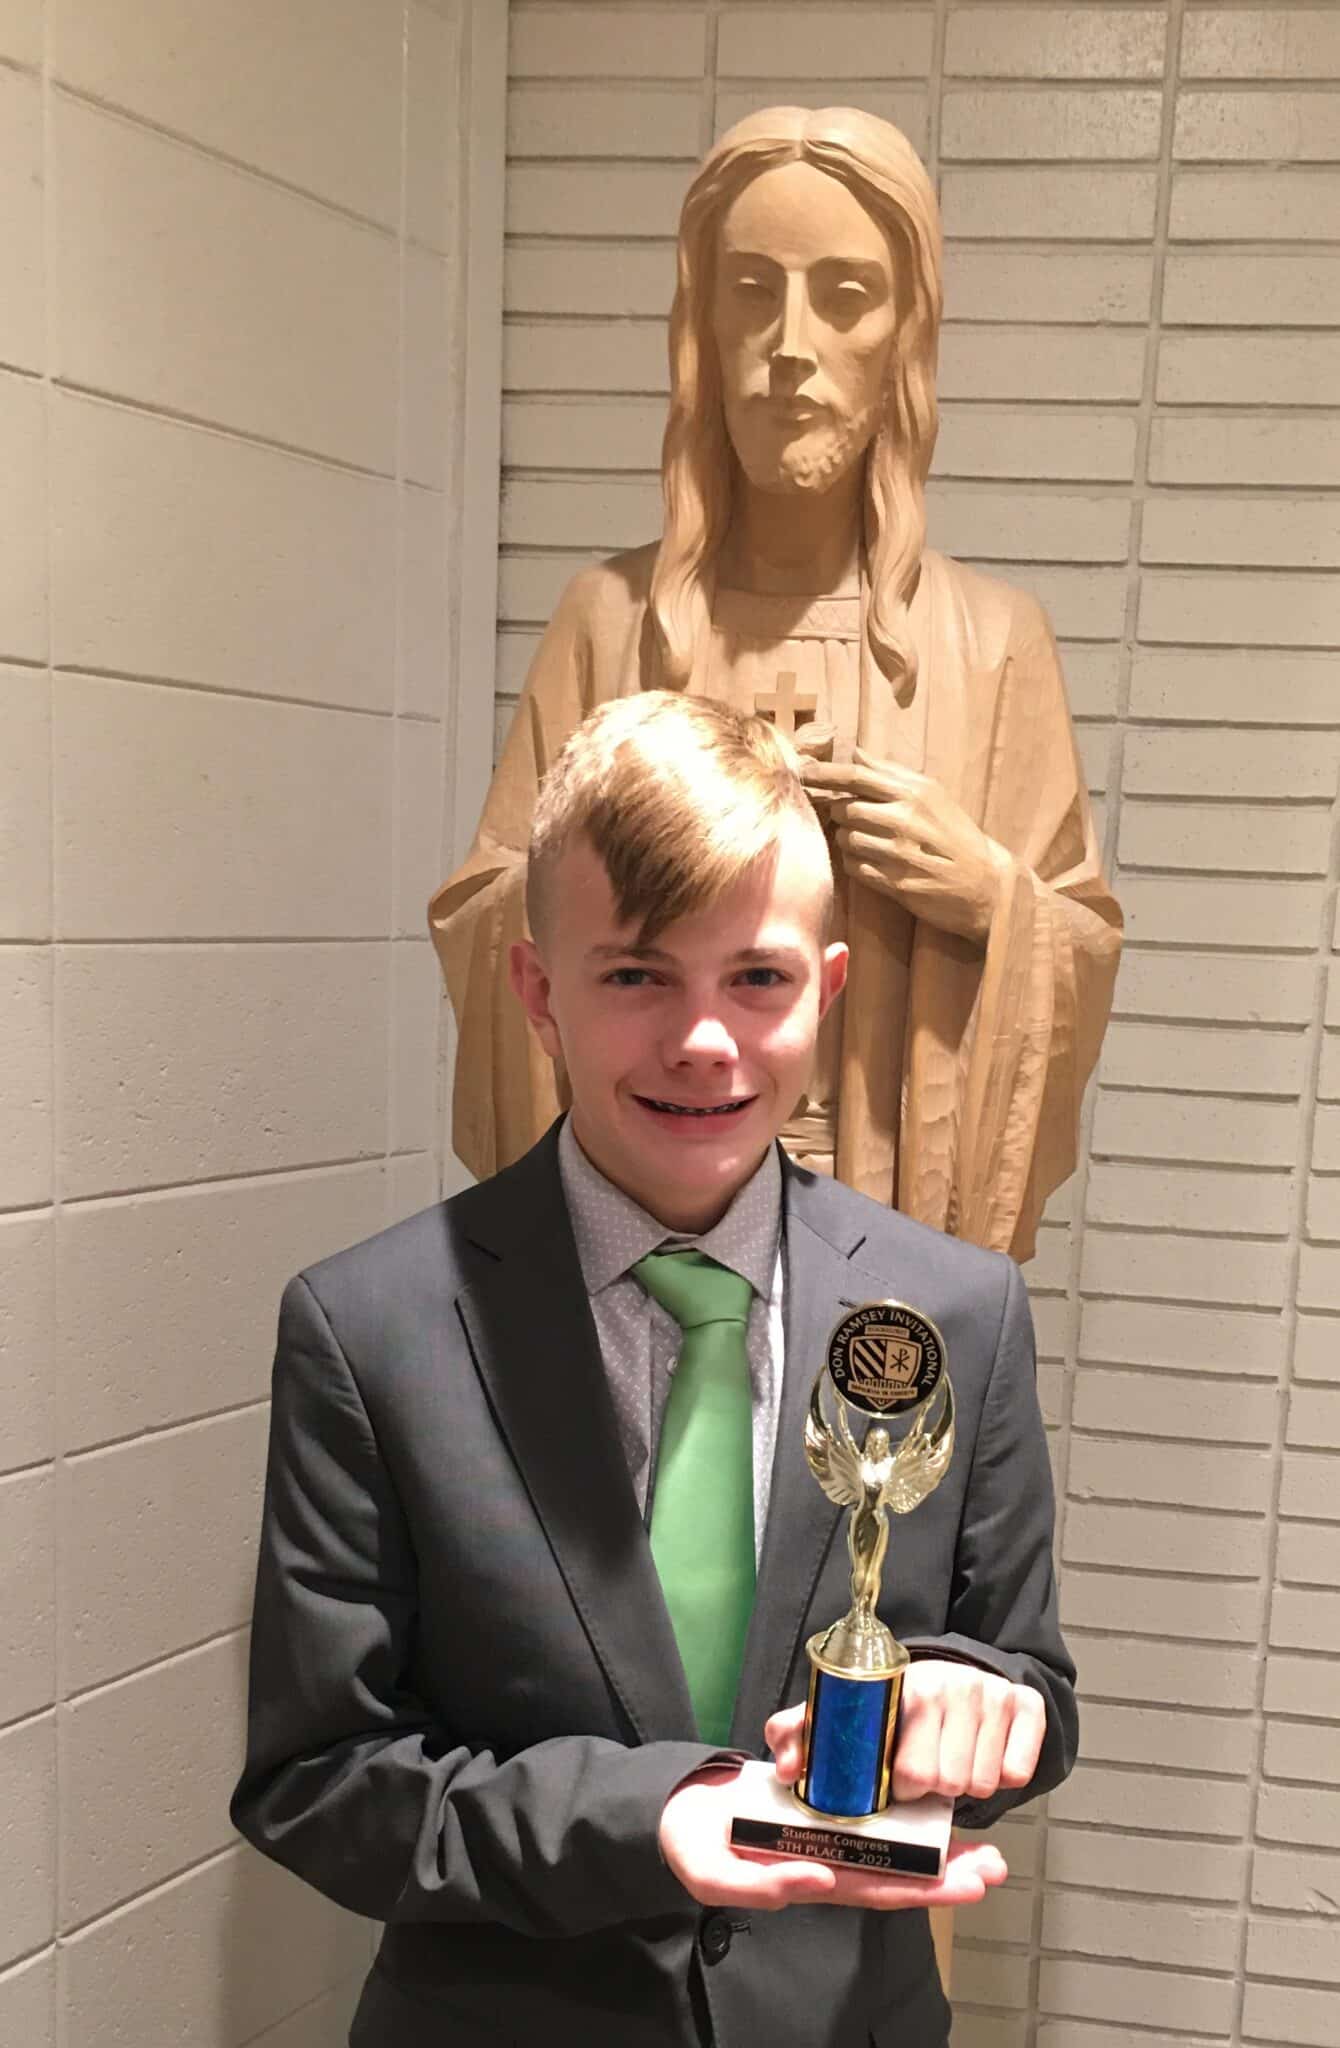 SCA freshman Gavin Boor will compete at the National Speech and Debate Association tournament in Phoenix, Arizona this summer.